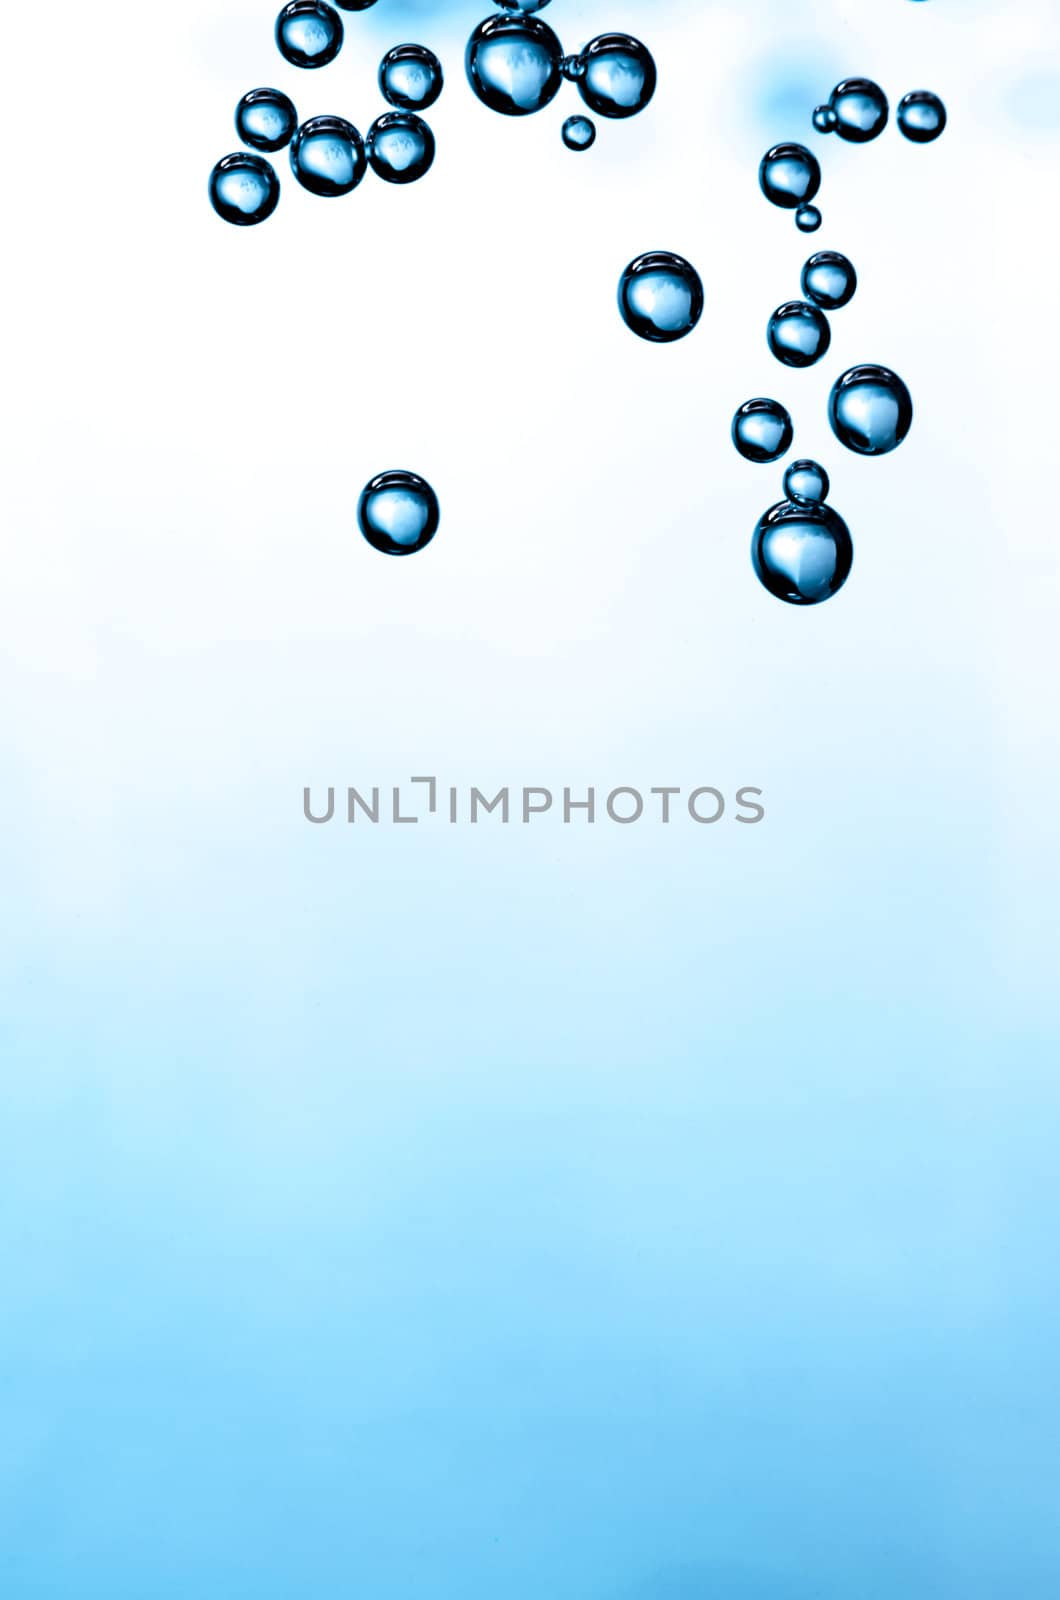 Gradient background with bubbles in a corner.